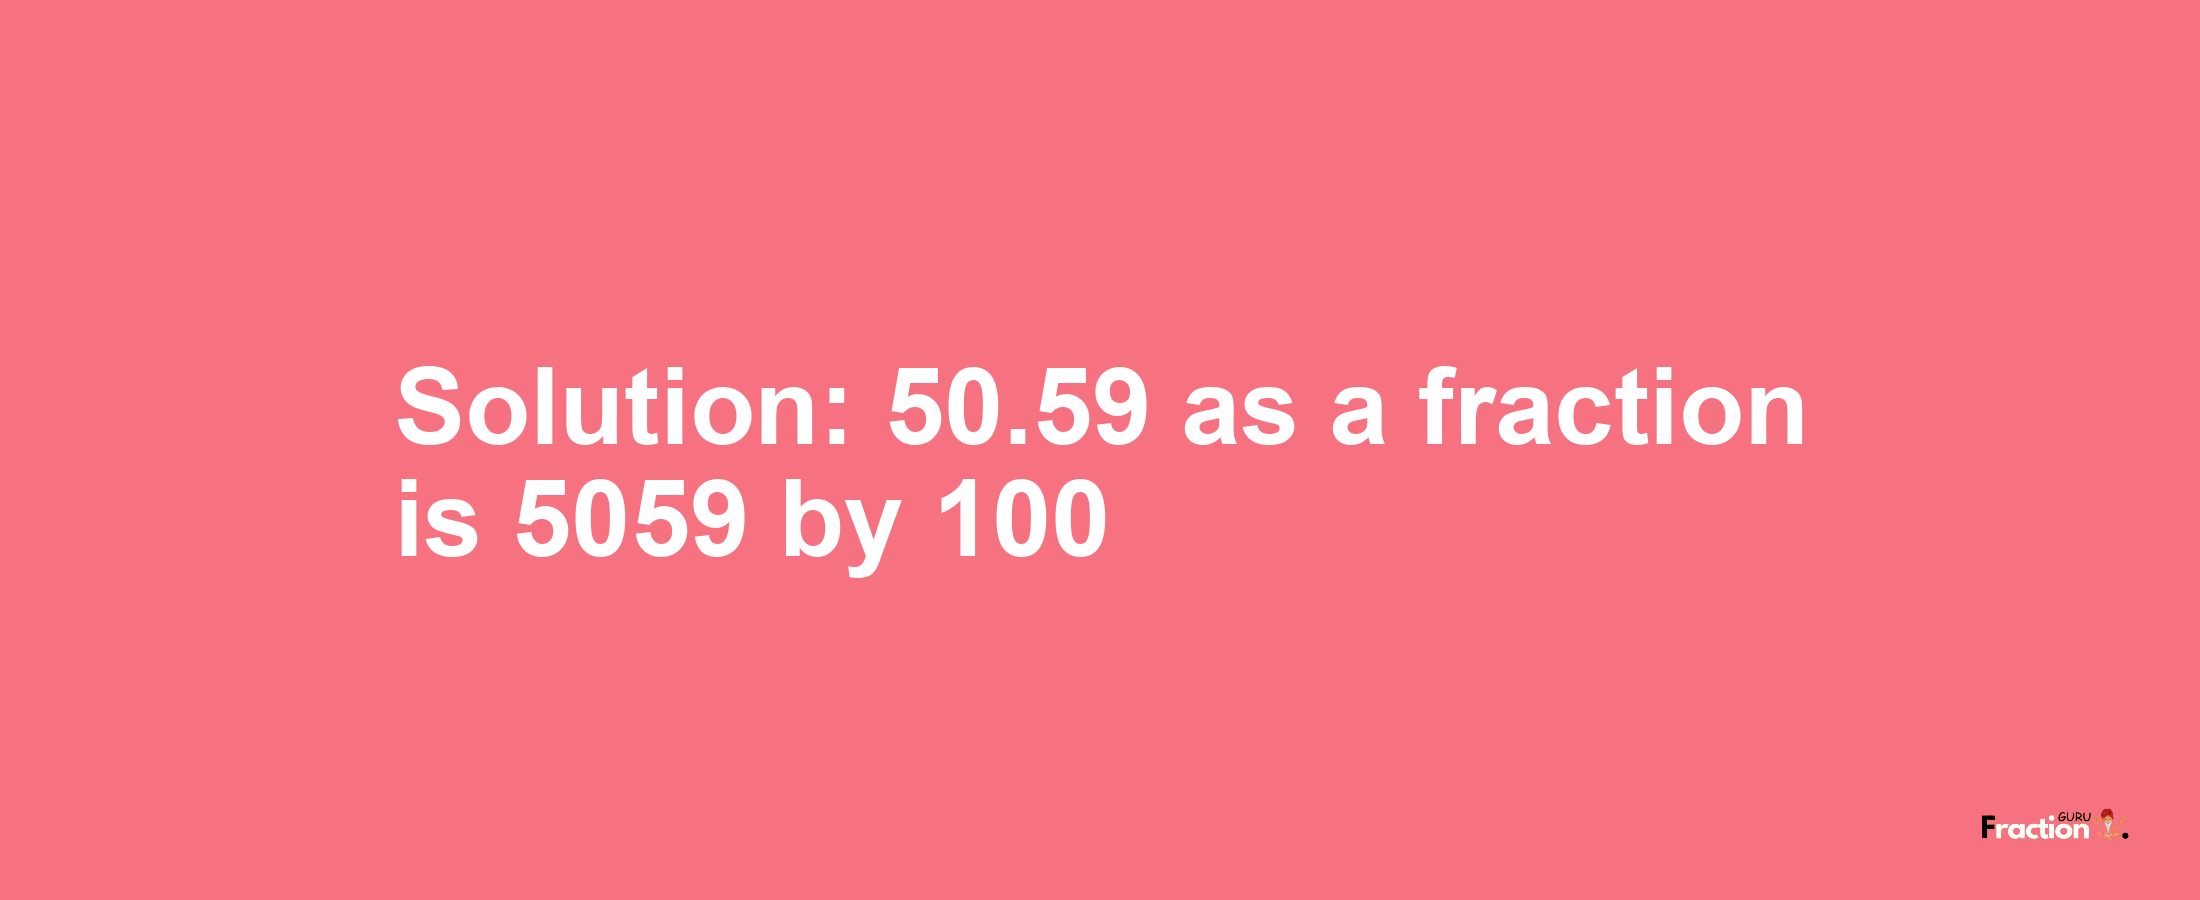 Solution:50.59 as a fraction is 5059/100